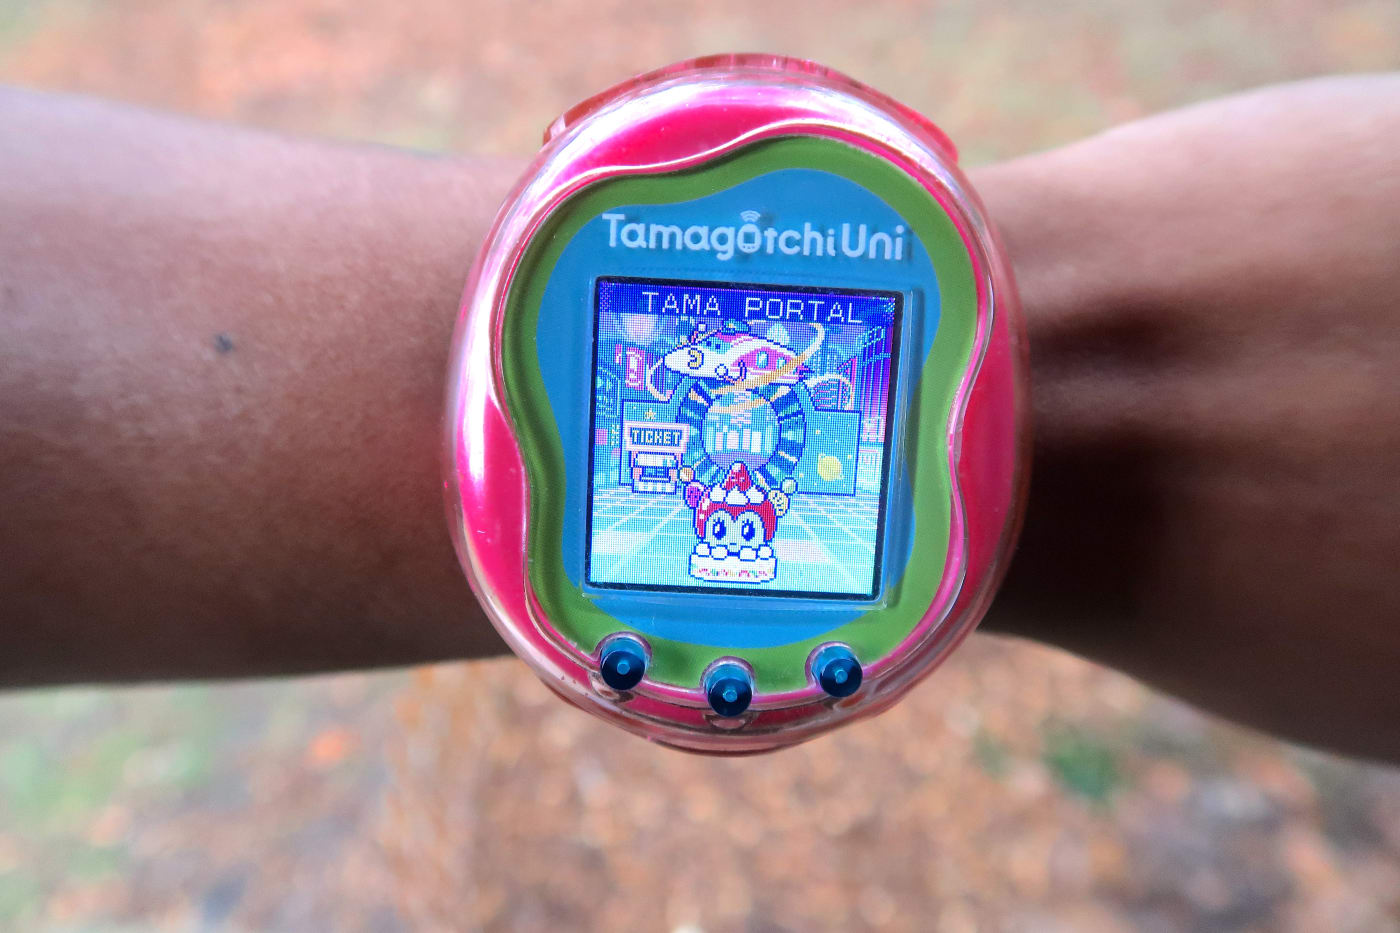 Tamagotchi Uni finally feels complete after its biggest update yet